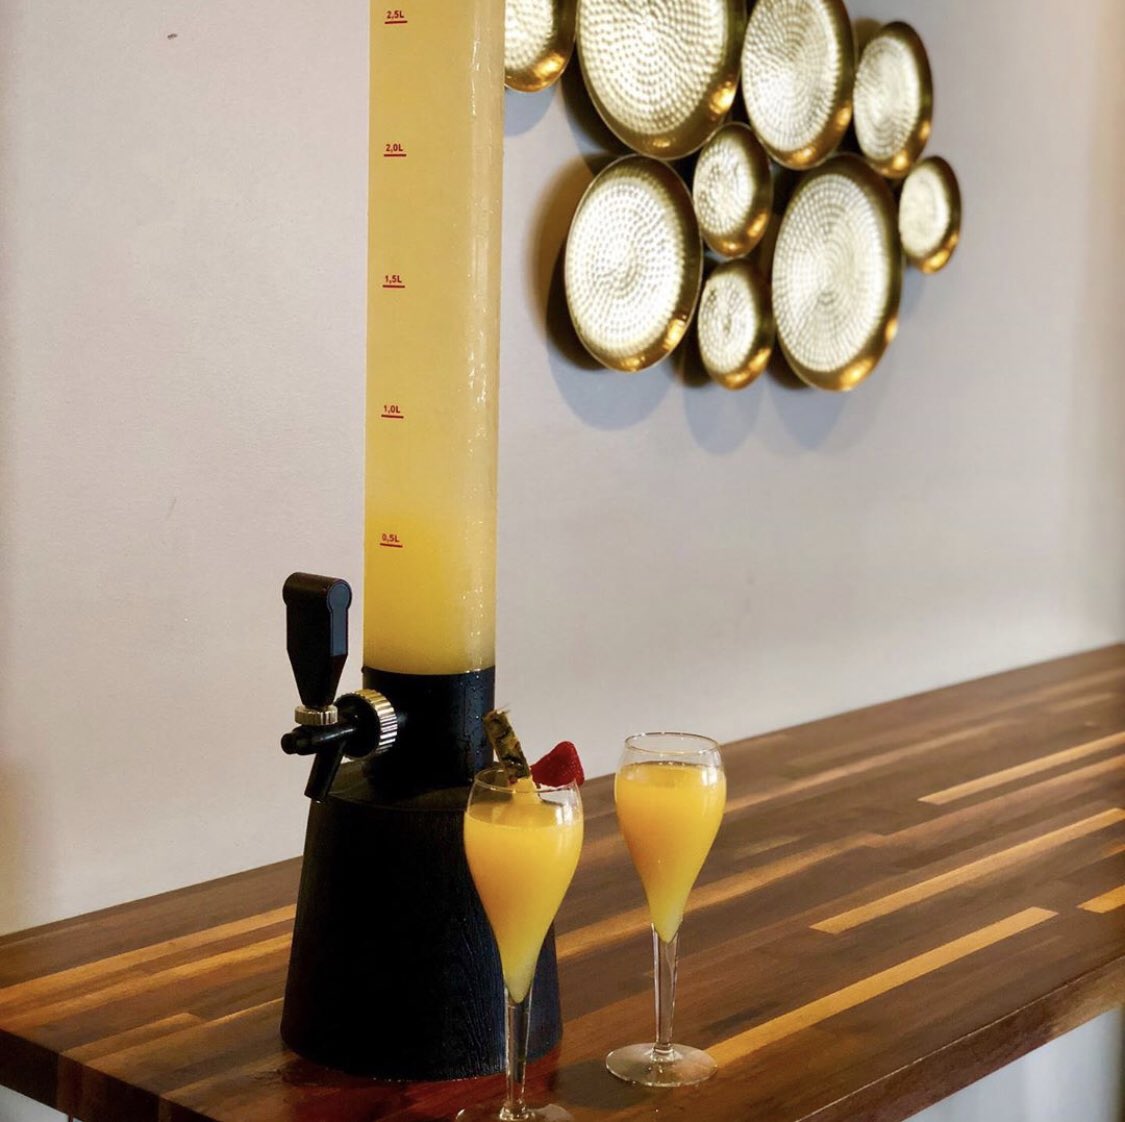 Mimosa & Margarita Towers available daily!!! ———————————————— #914